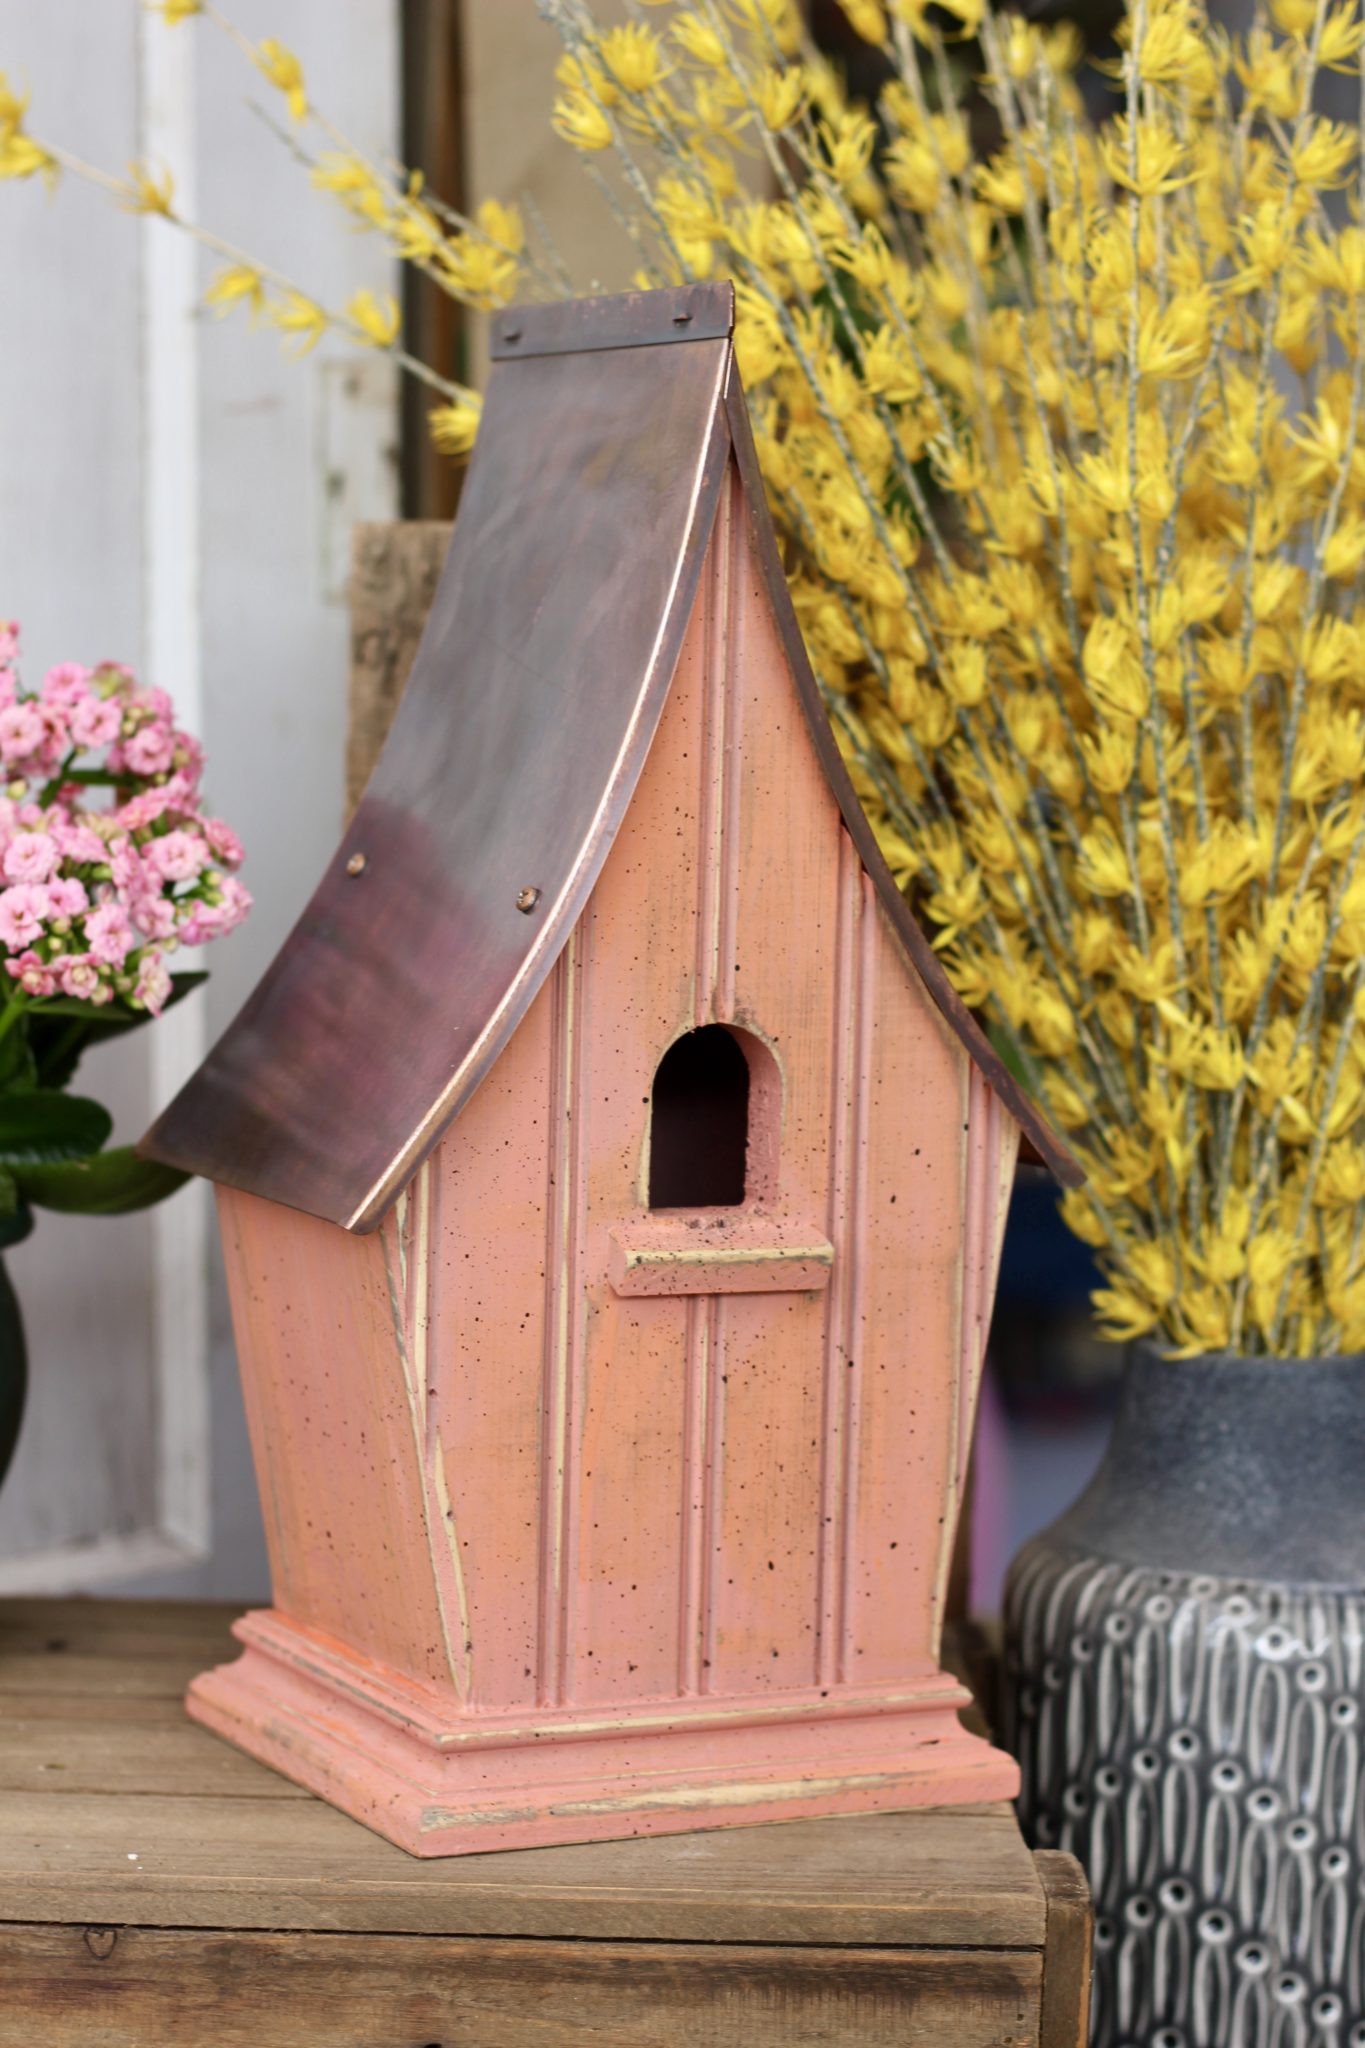 A copper roofed bird house in the color peach.